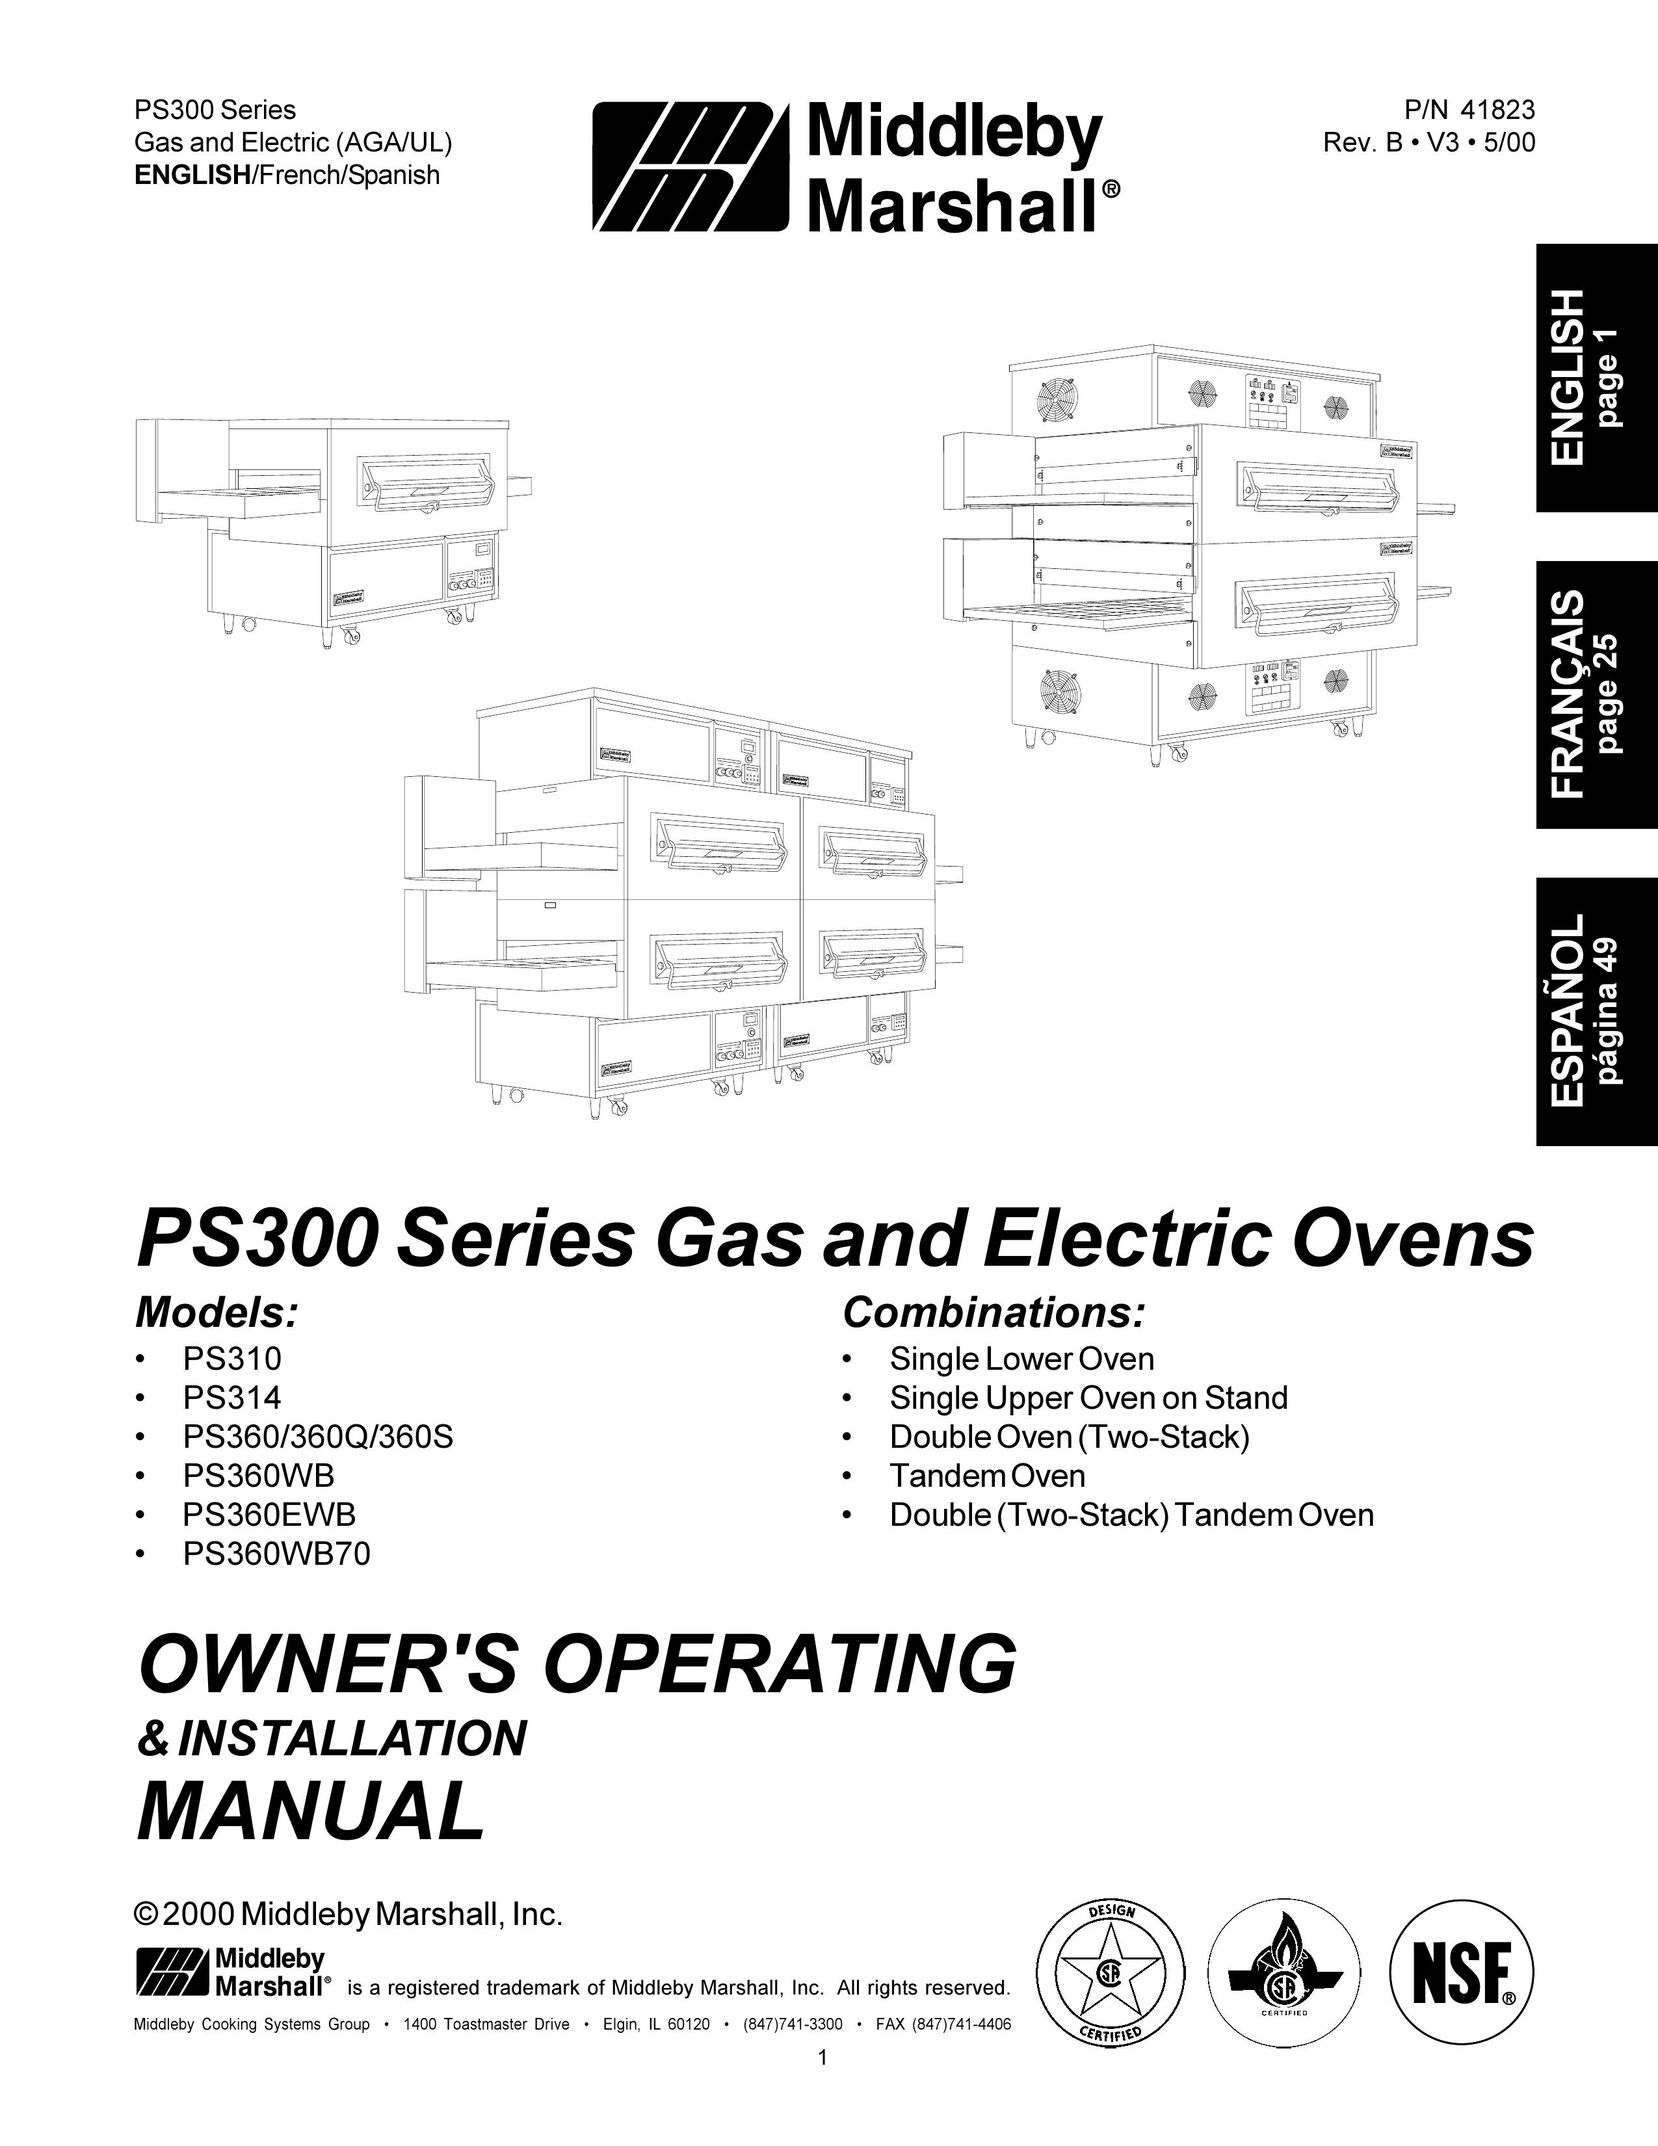 Middleby Marshall PS360S Oven User Manual